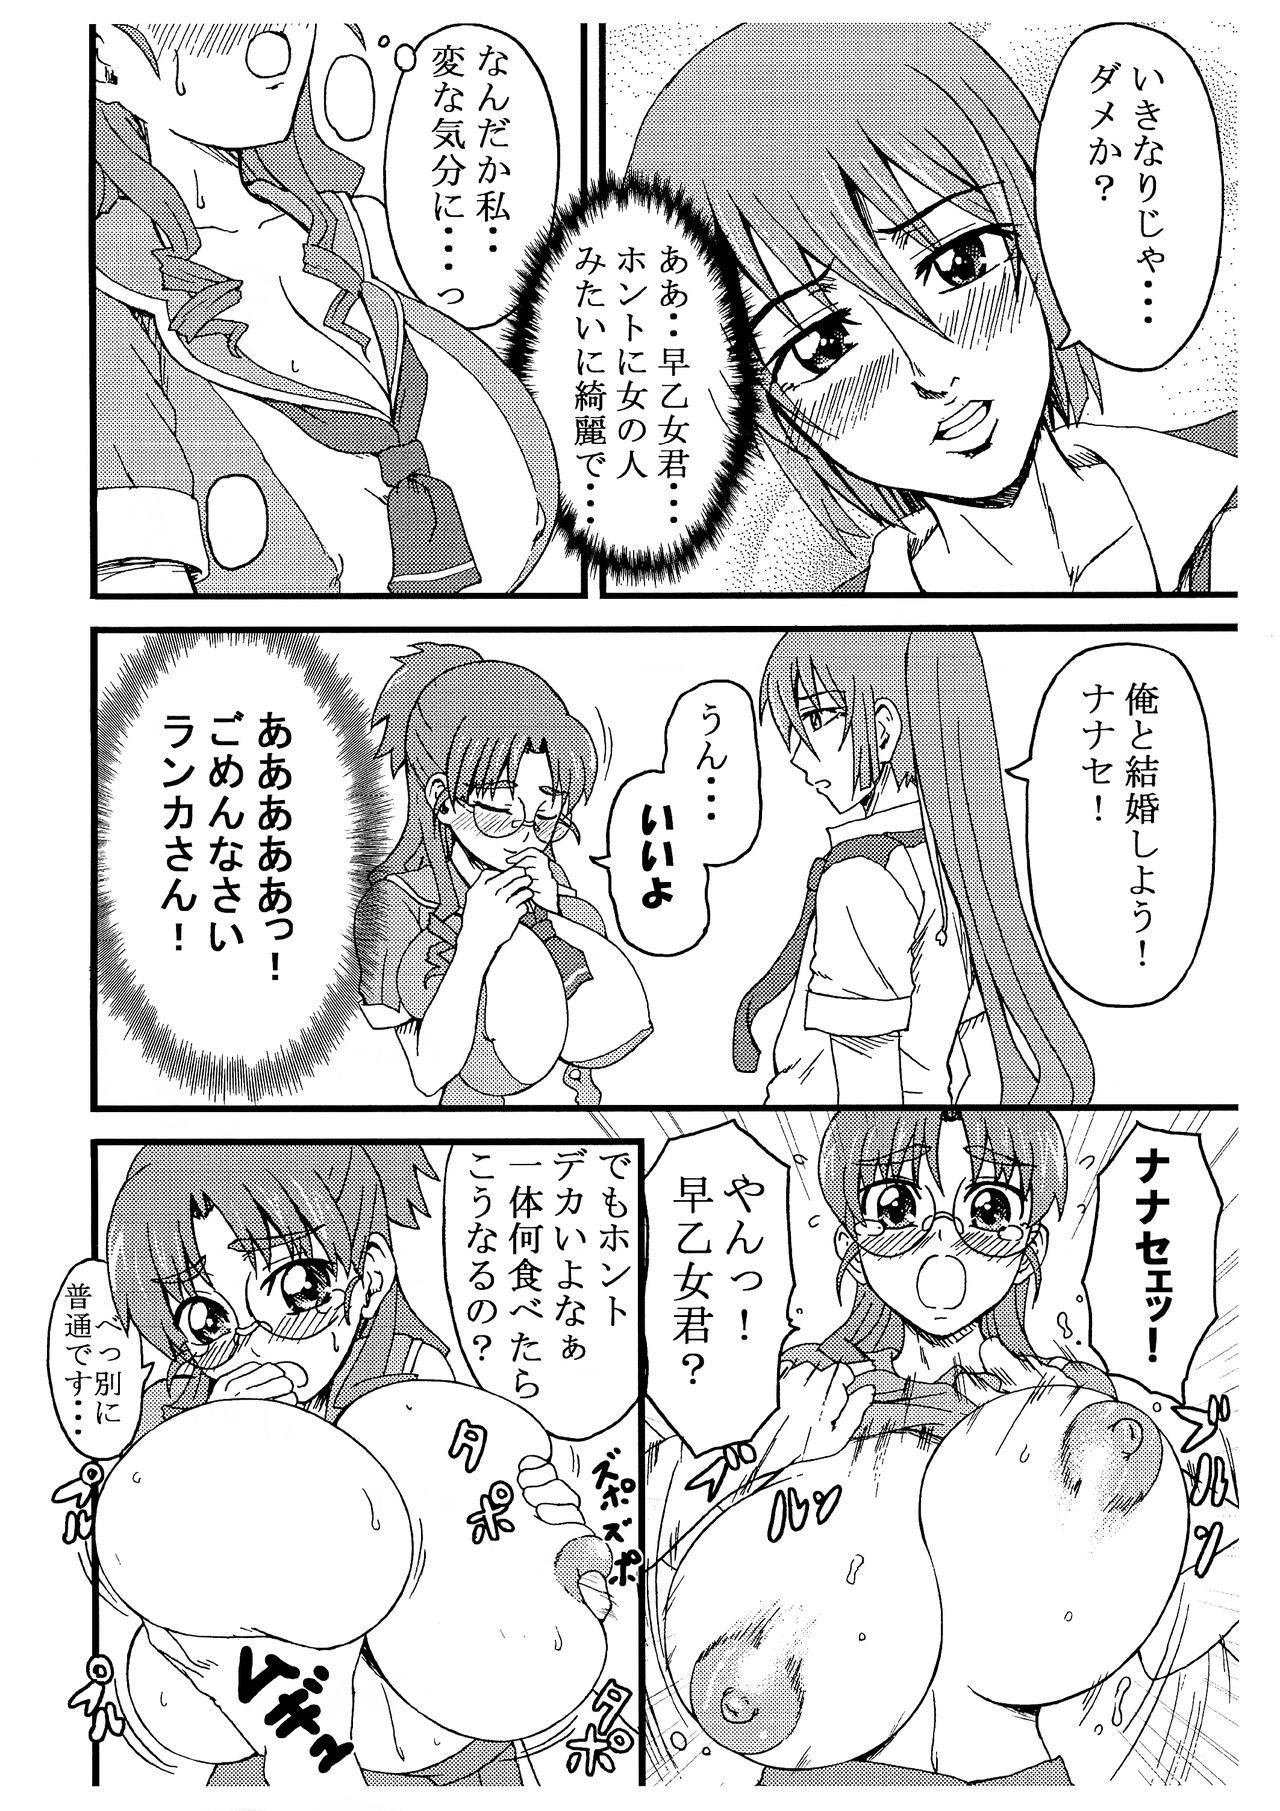 Soapy Nanase 100% - Macross frontier Fucking Sex - Page 4